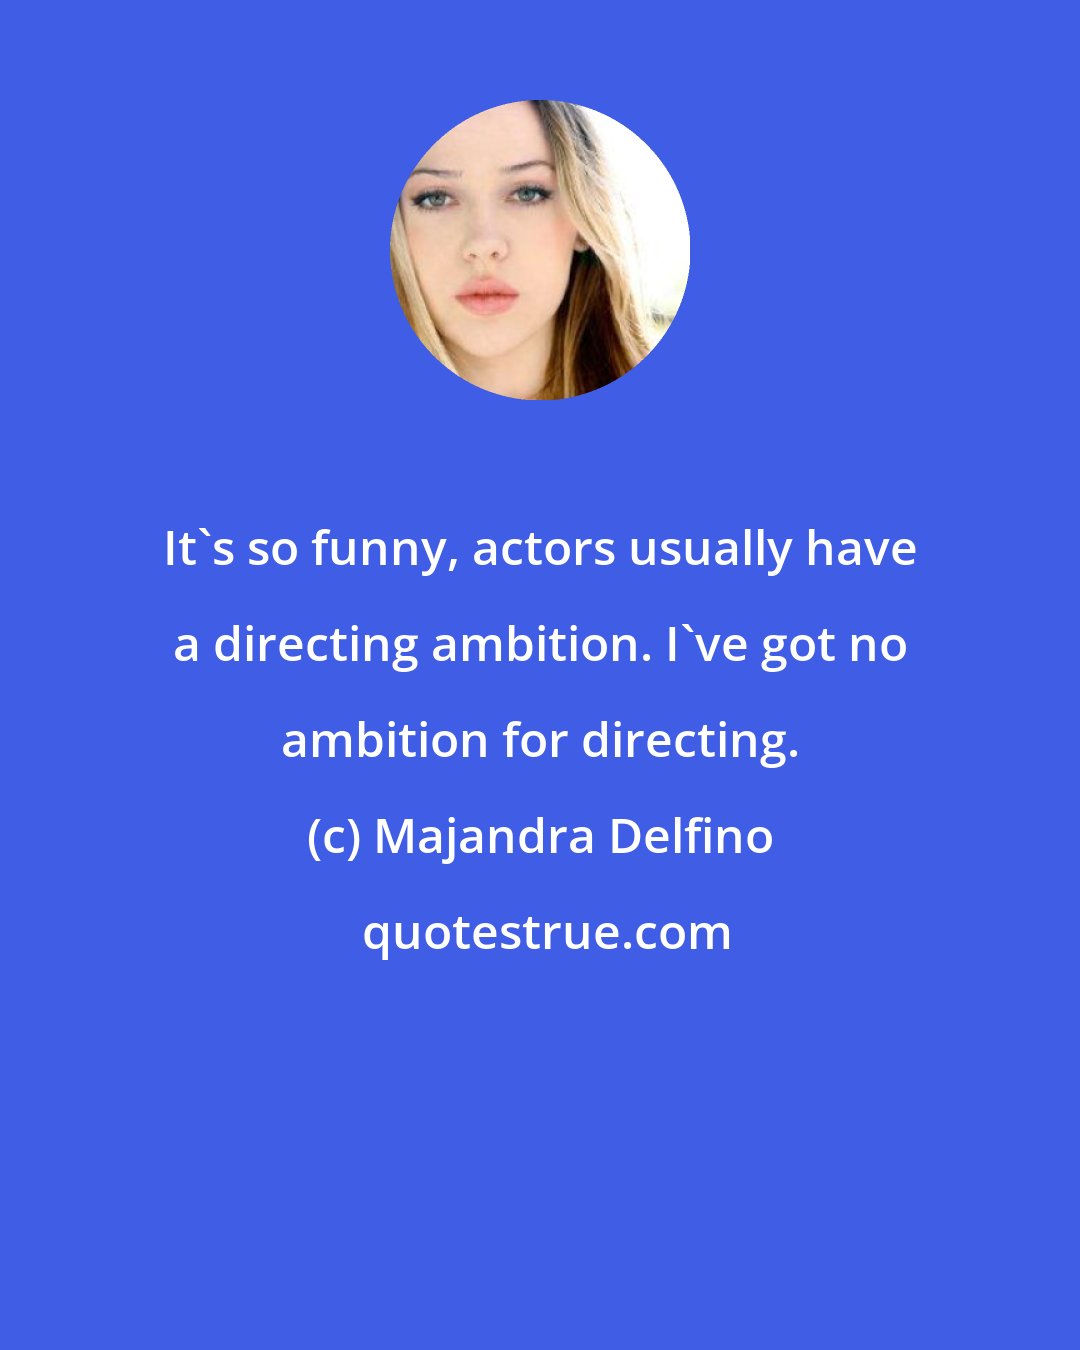 Majandra Delfino: It's so funny, actors usually have a directing ambition. I've got no ambition for directing.